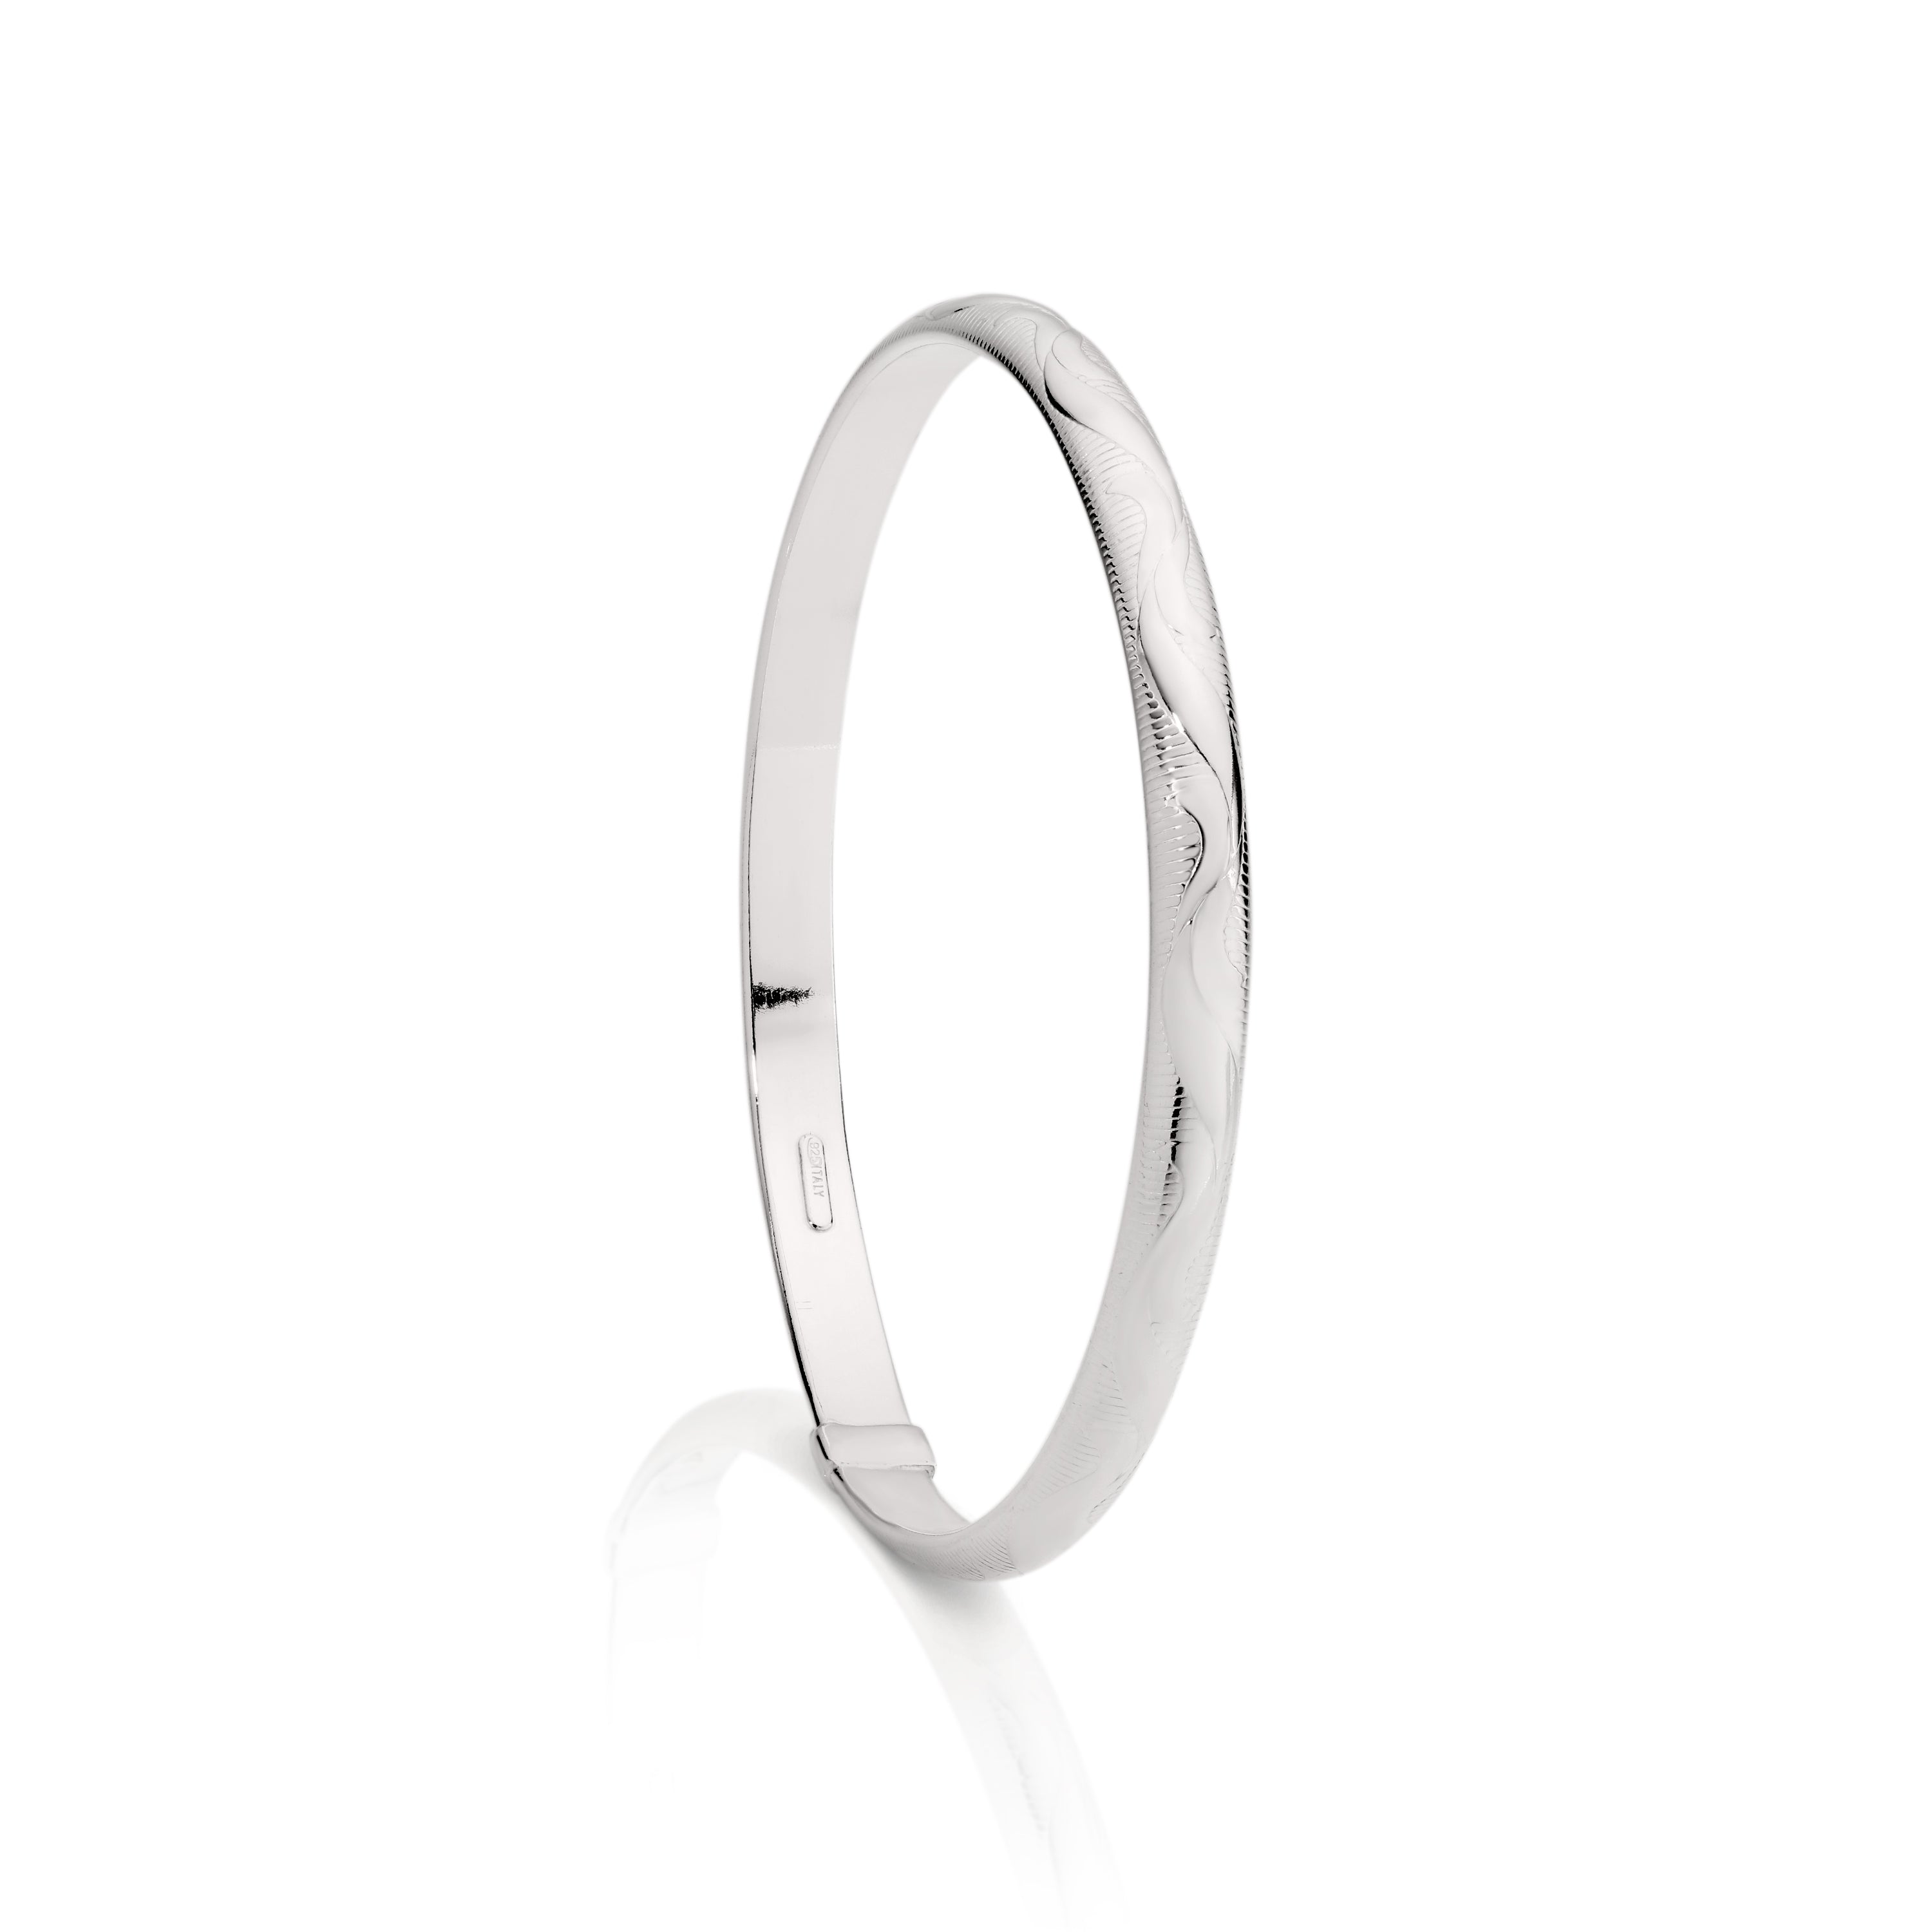 Silver 6mm engraved bangle 65mm